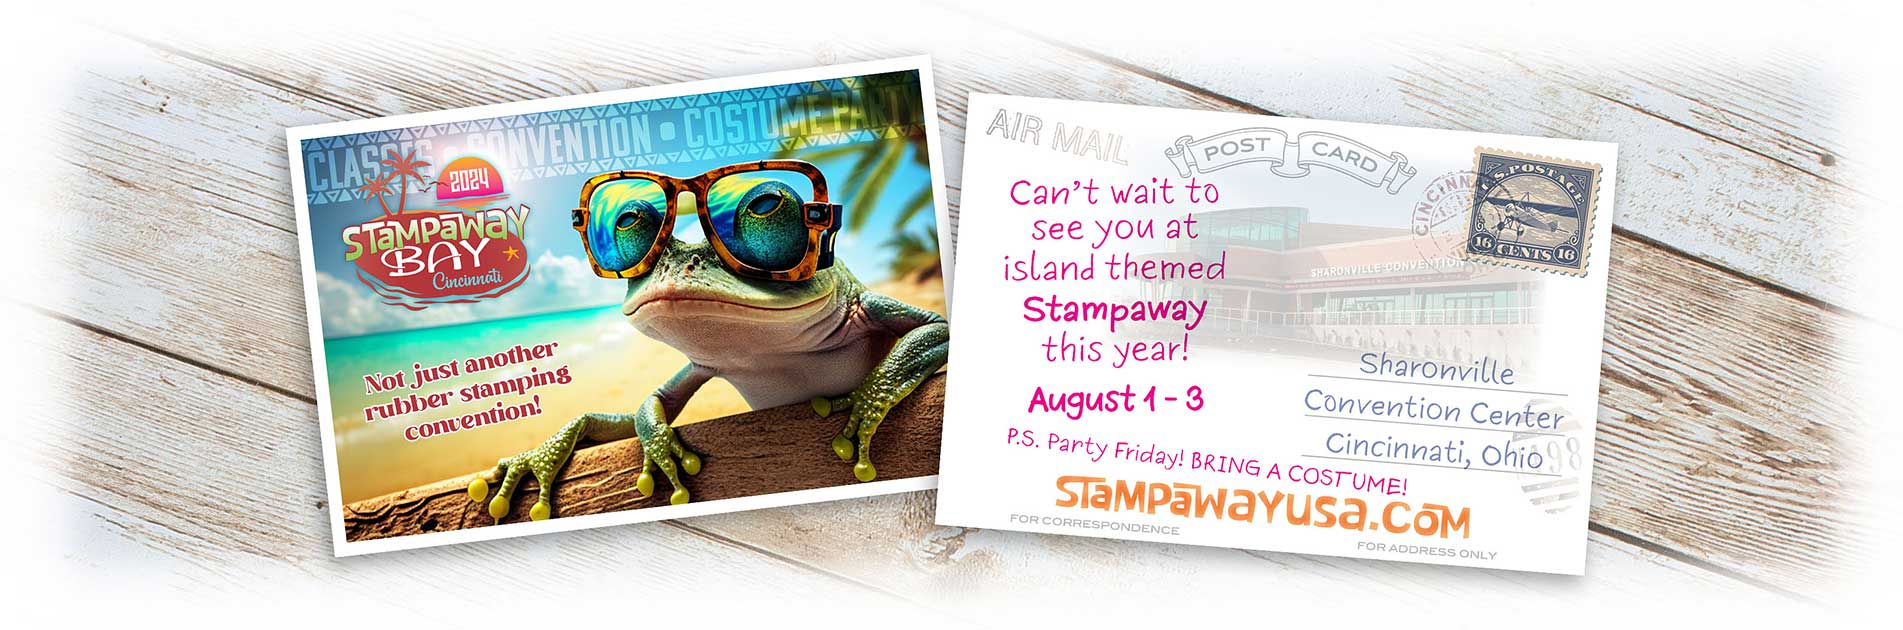 Stampaway Bay Friday Night Costume Party